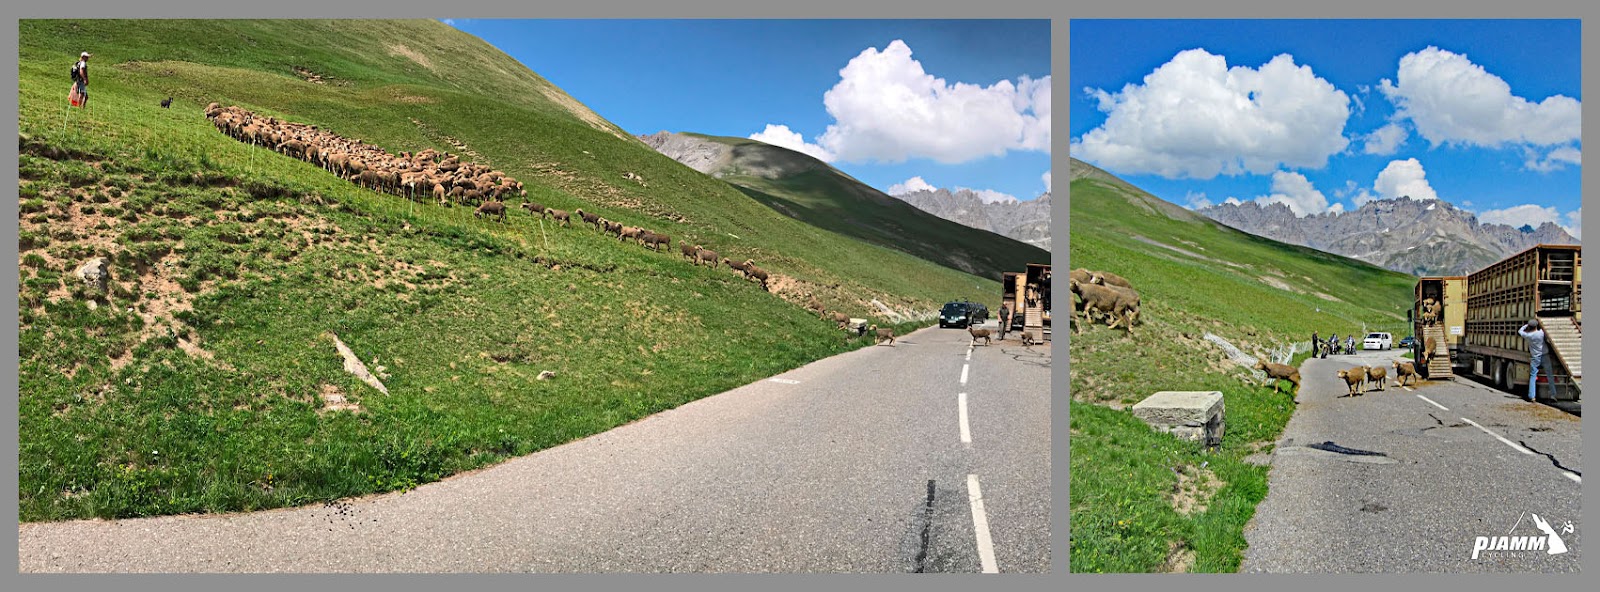 Cycling Col du Galibier from Valloire: livestock crossing roadway and heading up grassy hillside